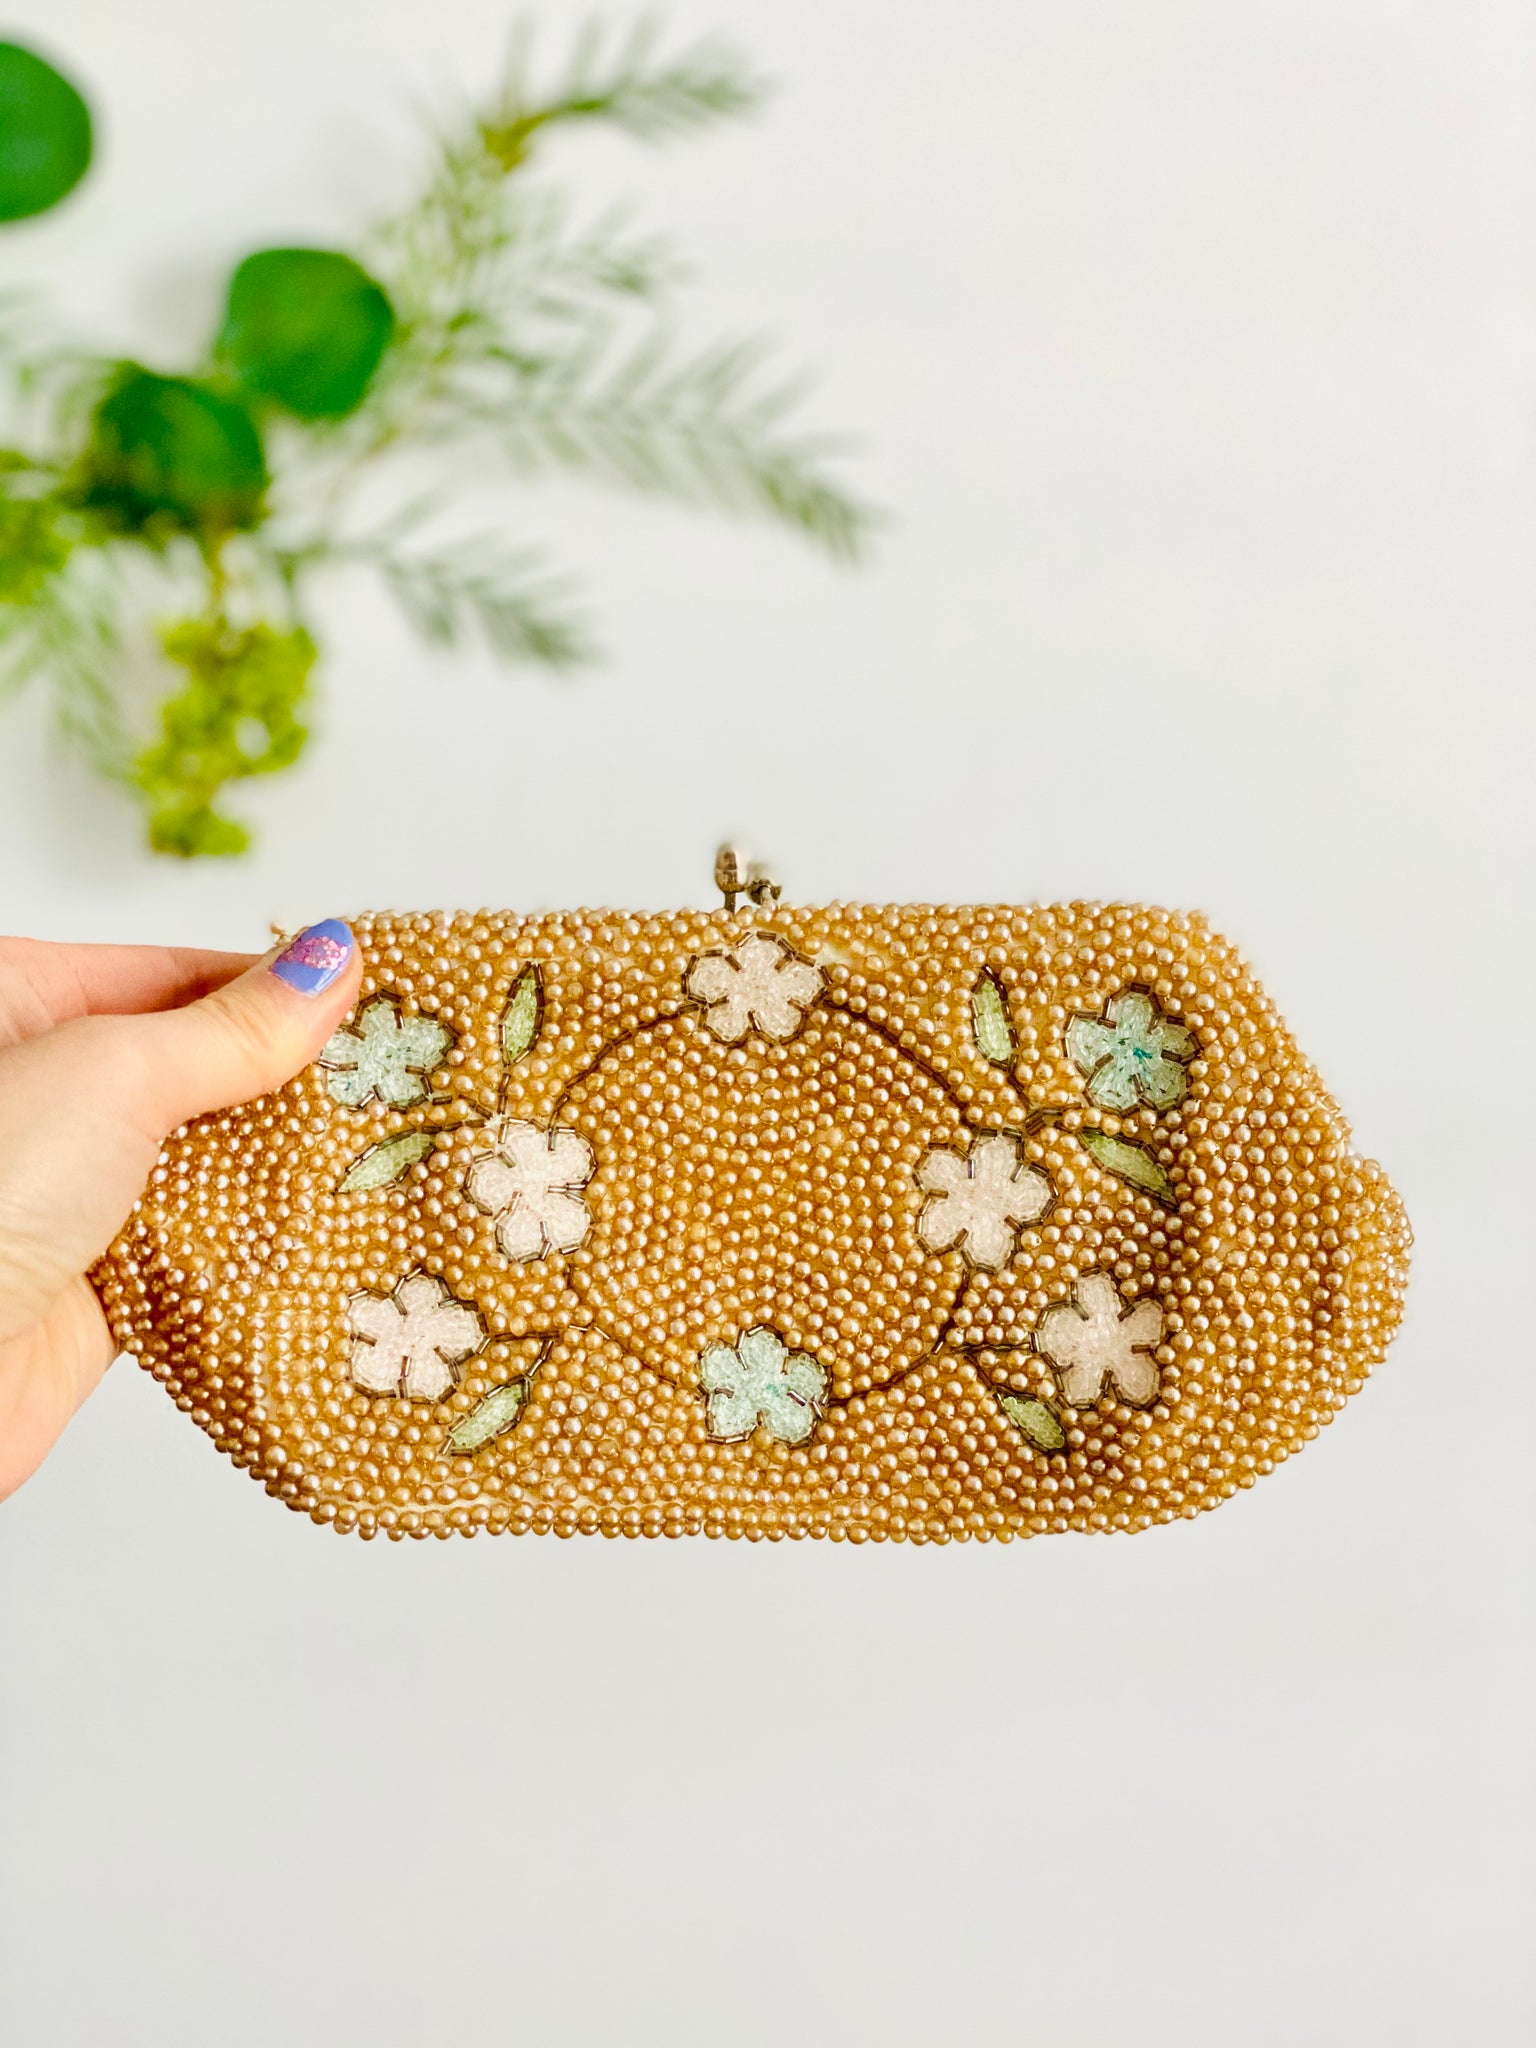 1940s 50s Pastel Beaded Evening Bag - Pearls & Embroidered Flowers